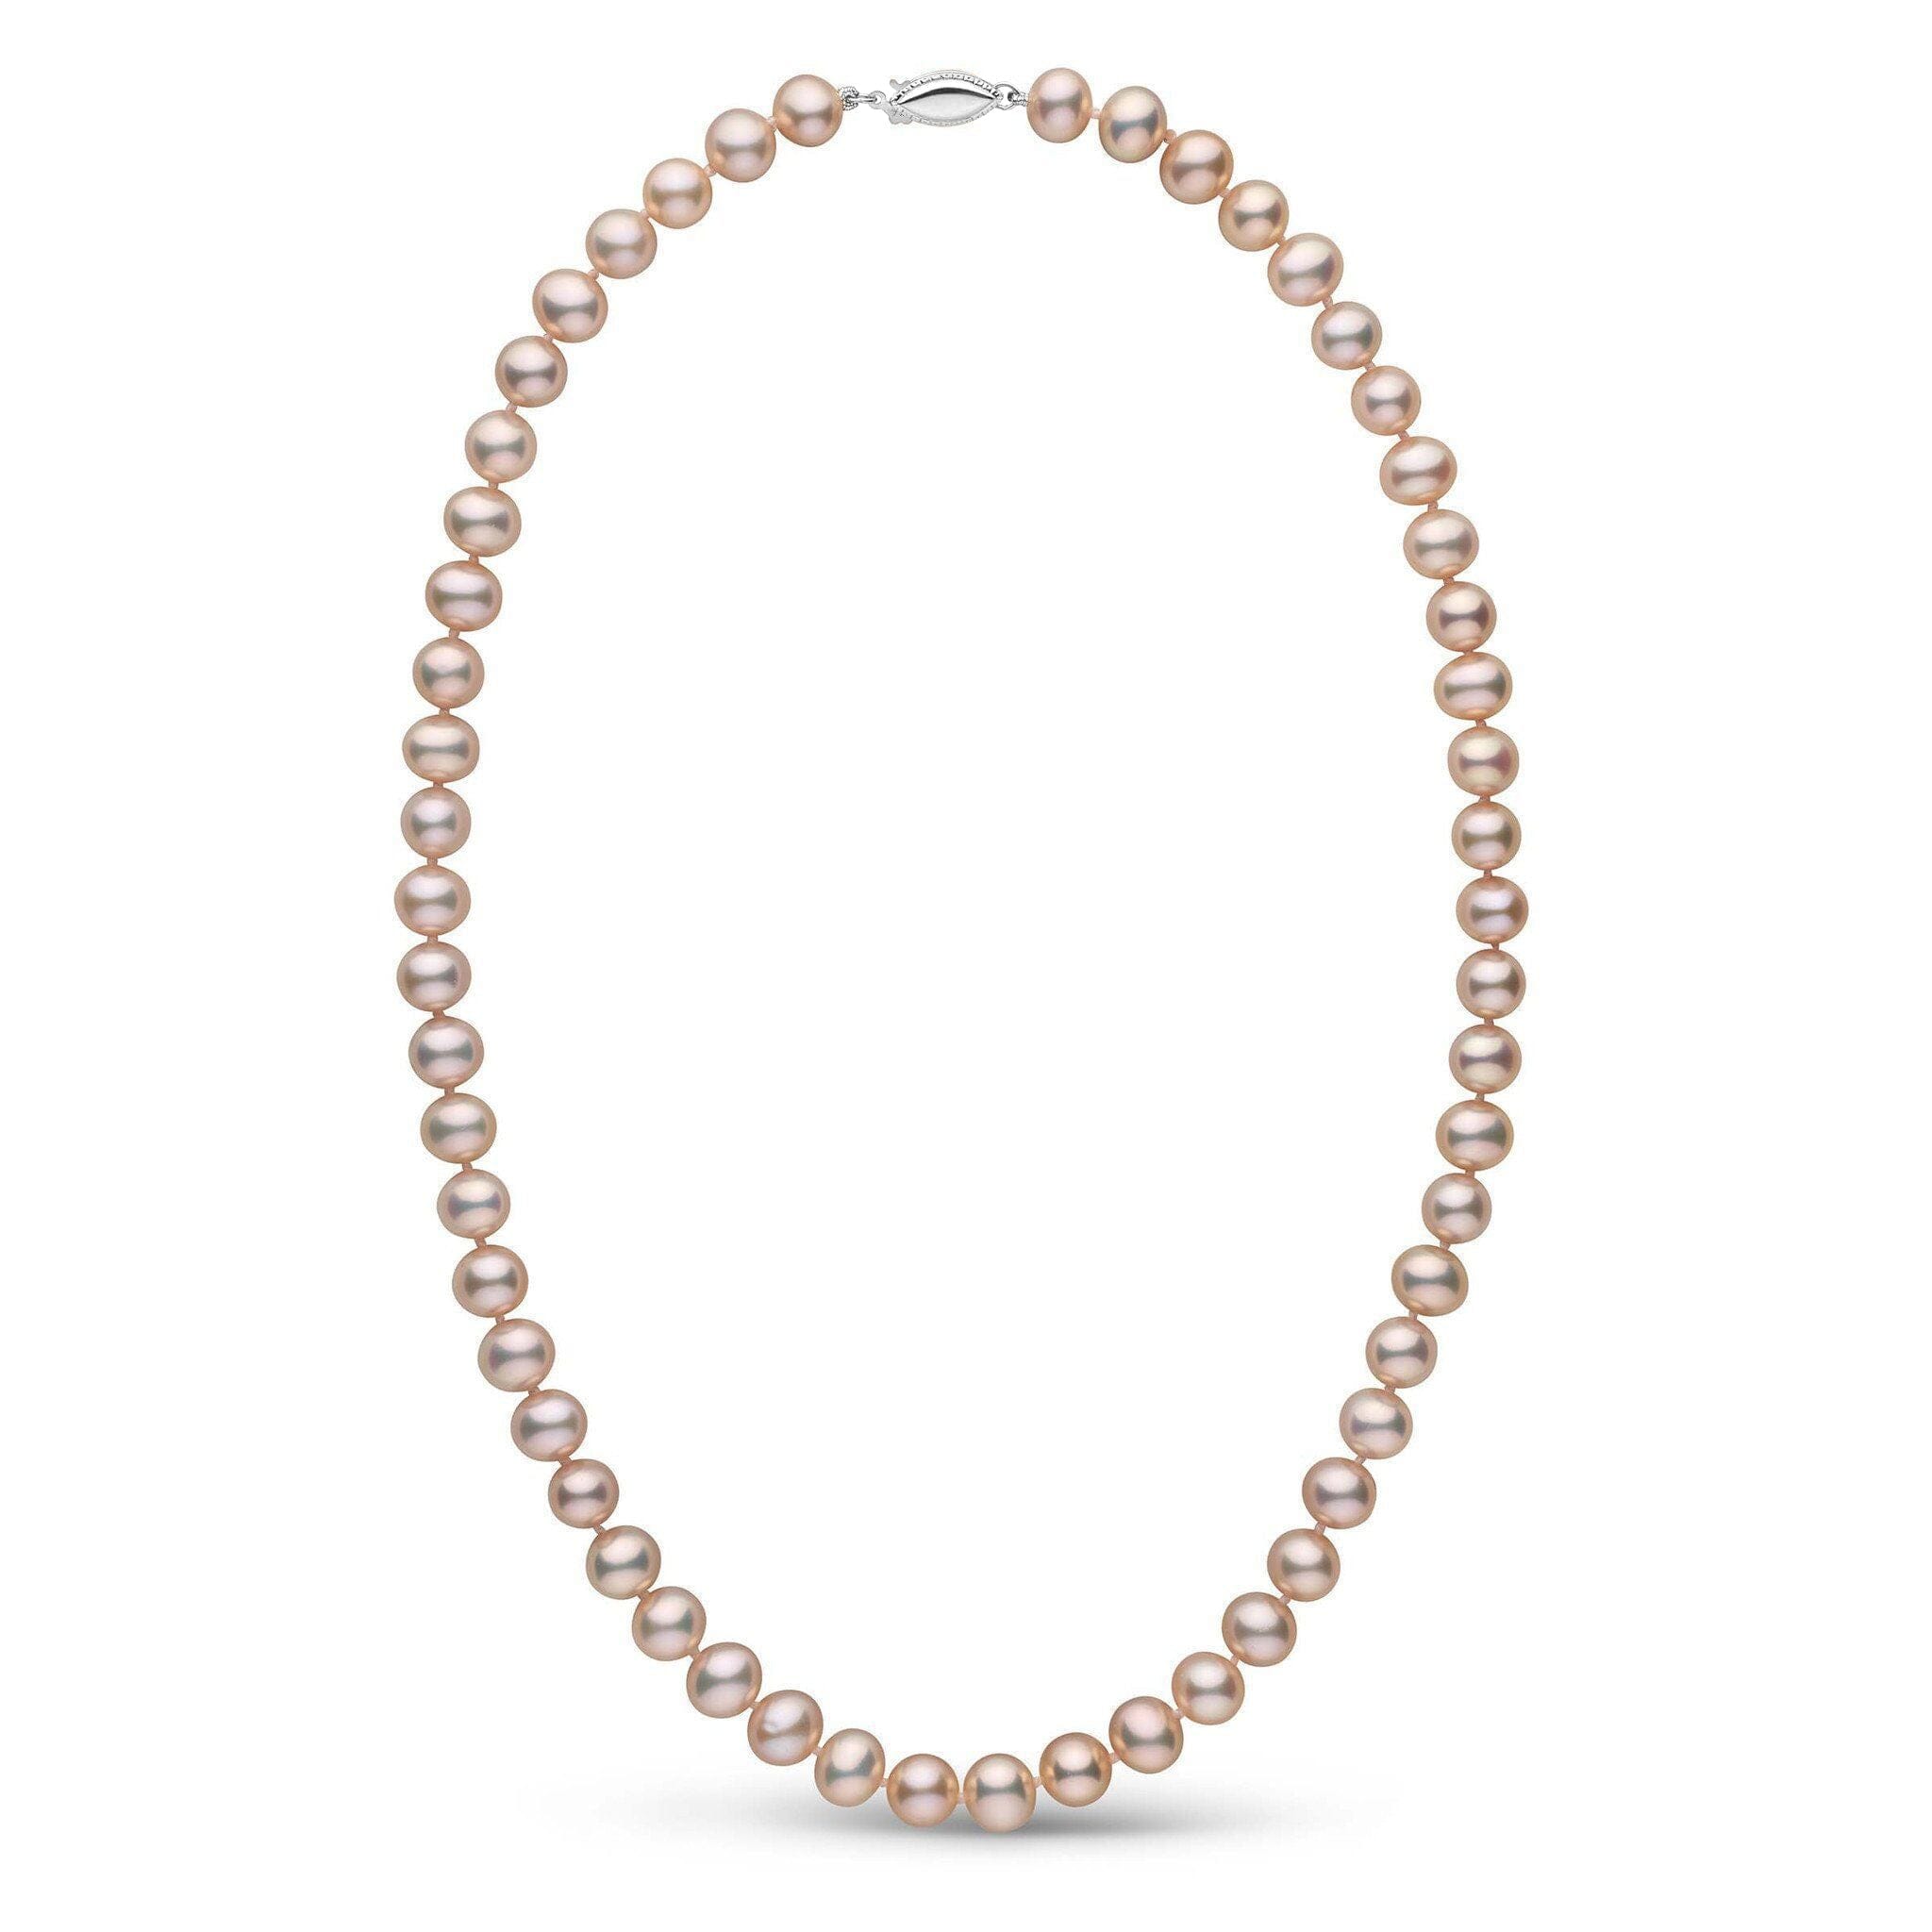 6.5-7.0 mm Metallic Pink to Peach AA+ Freshwater Pearl Necklace White Gold